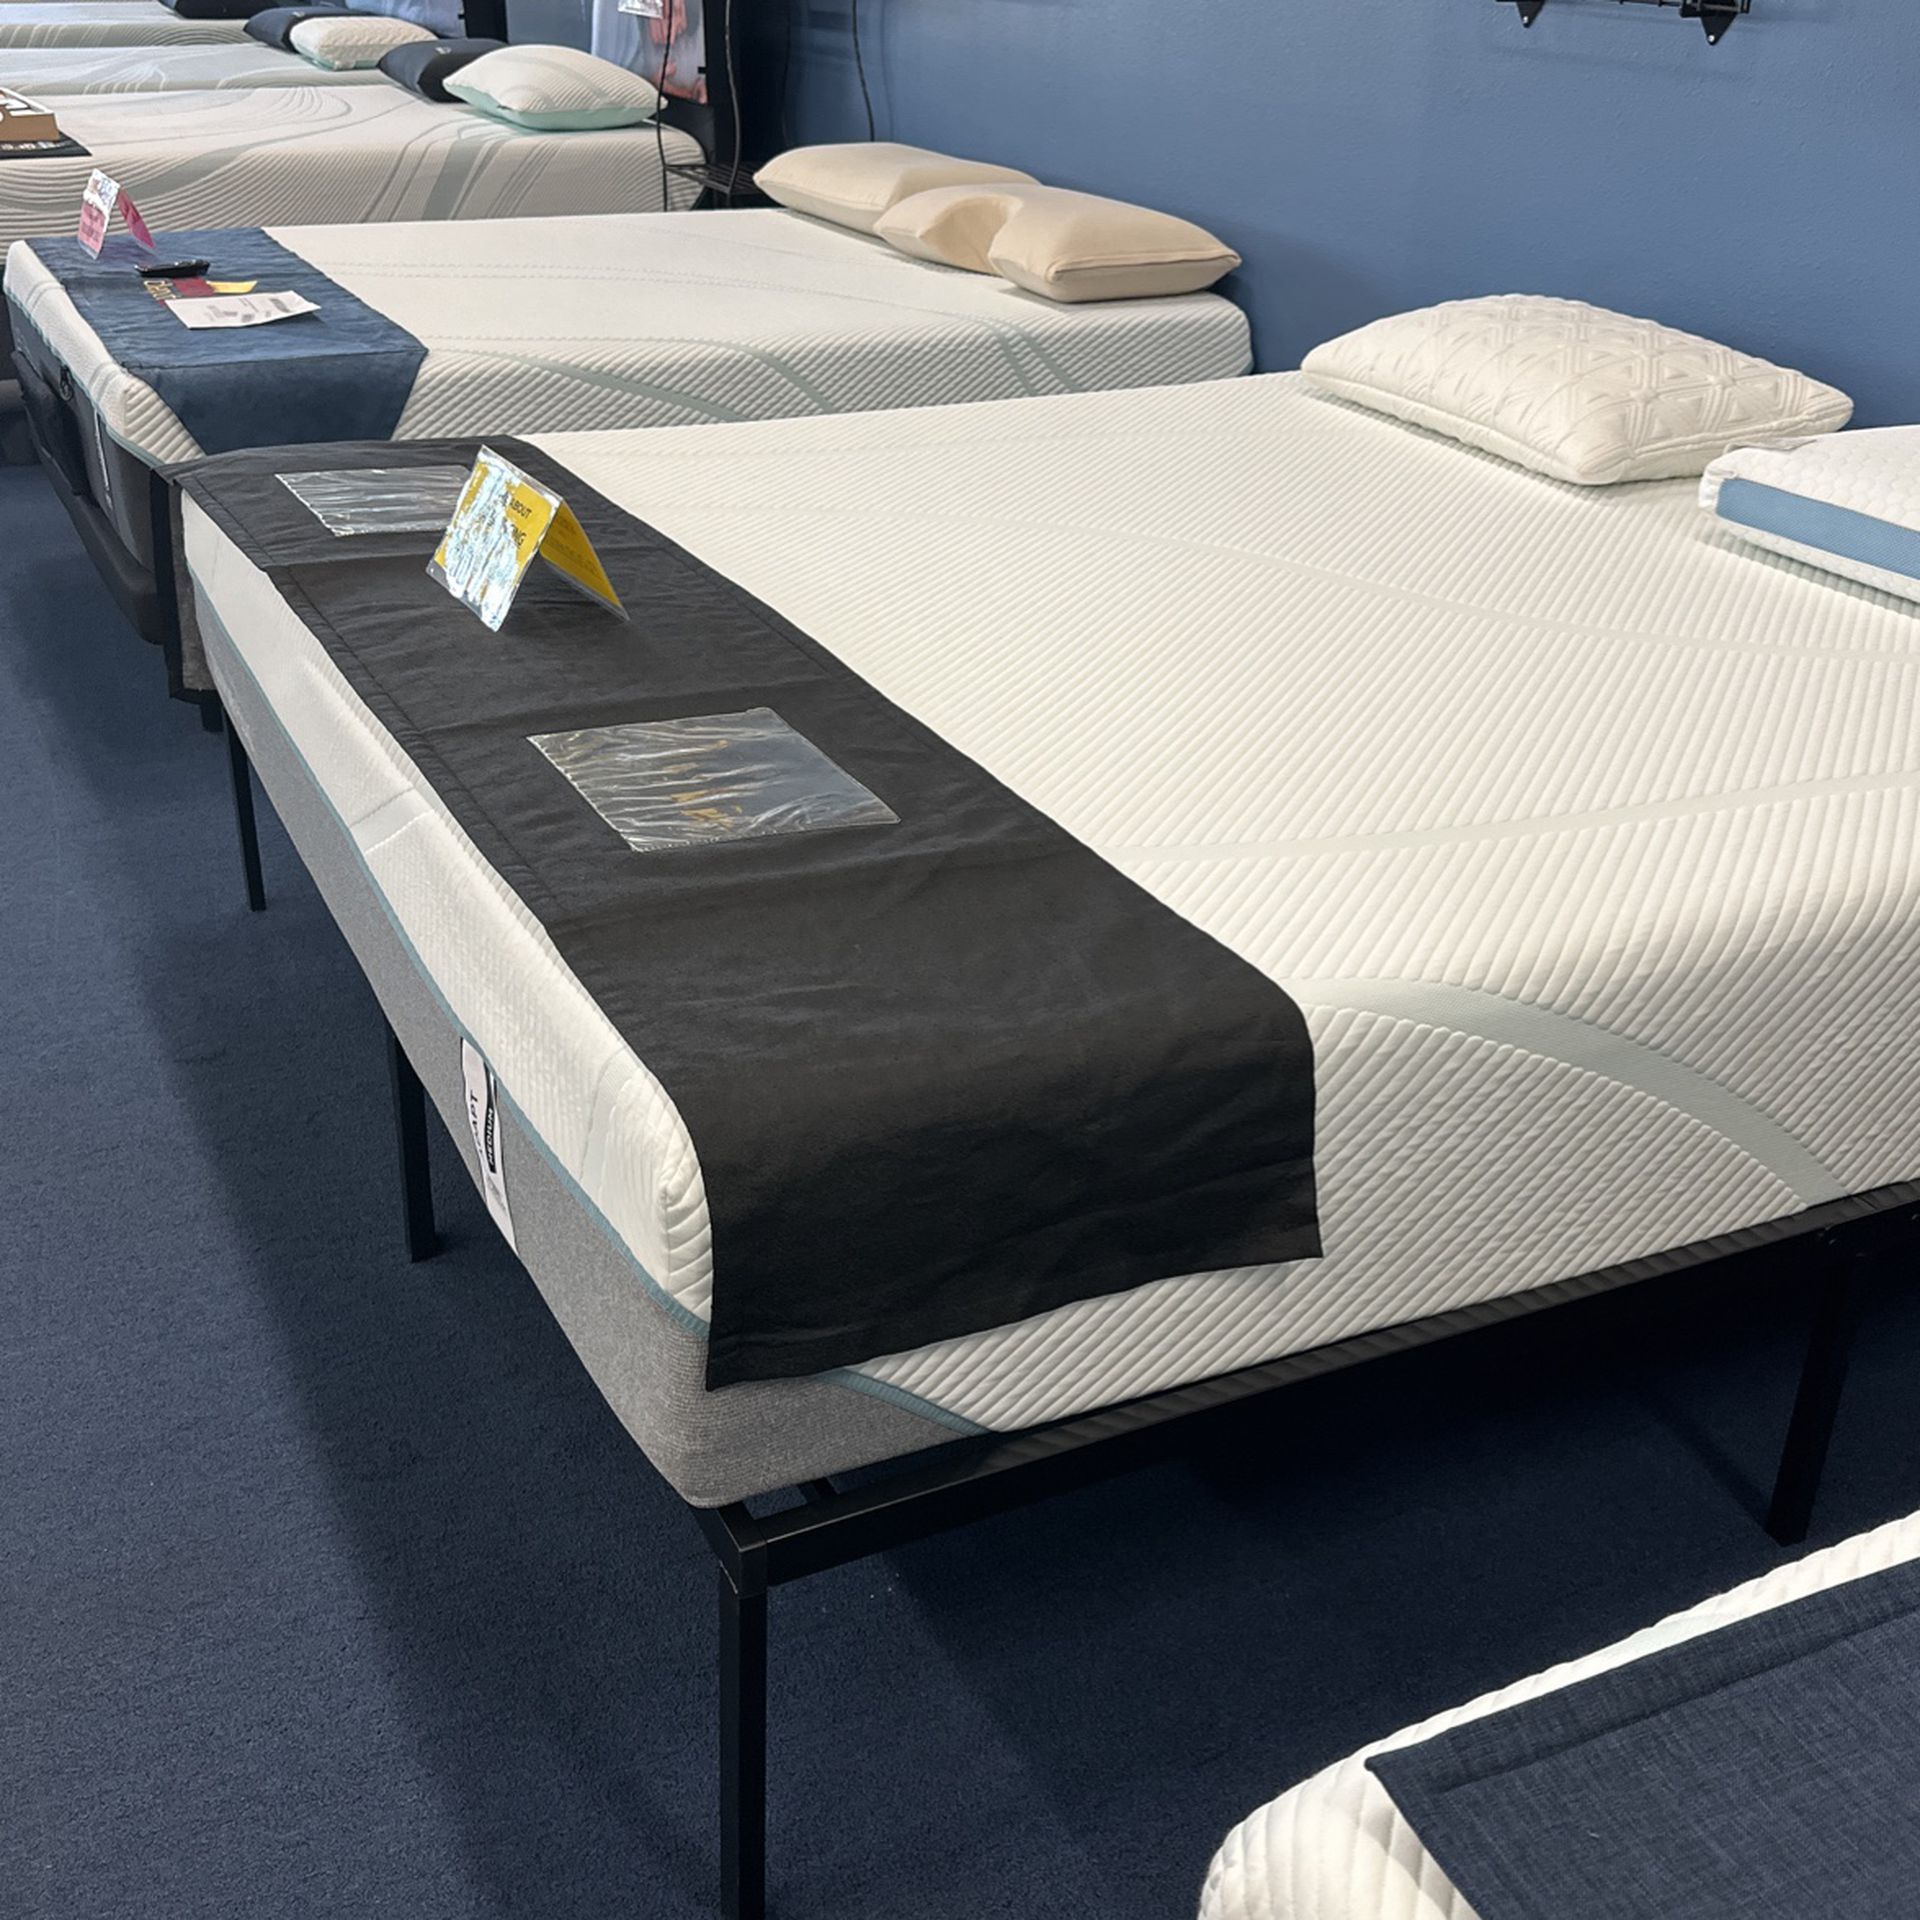 Up To 50% Off Brand New TempurPedic - This Weekend! Sale Ends Soon!